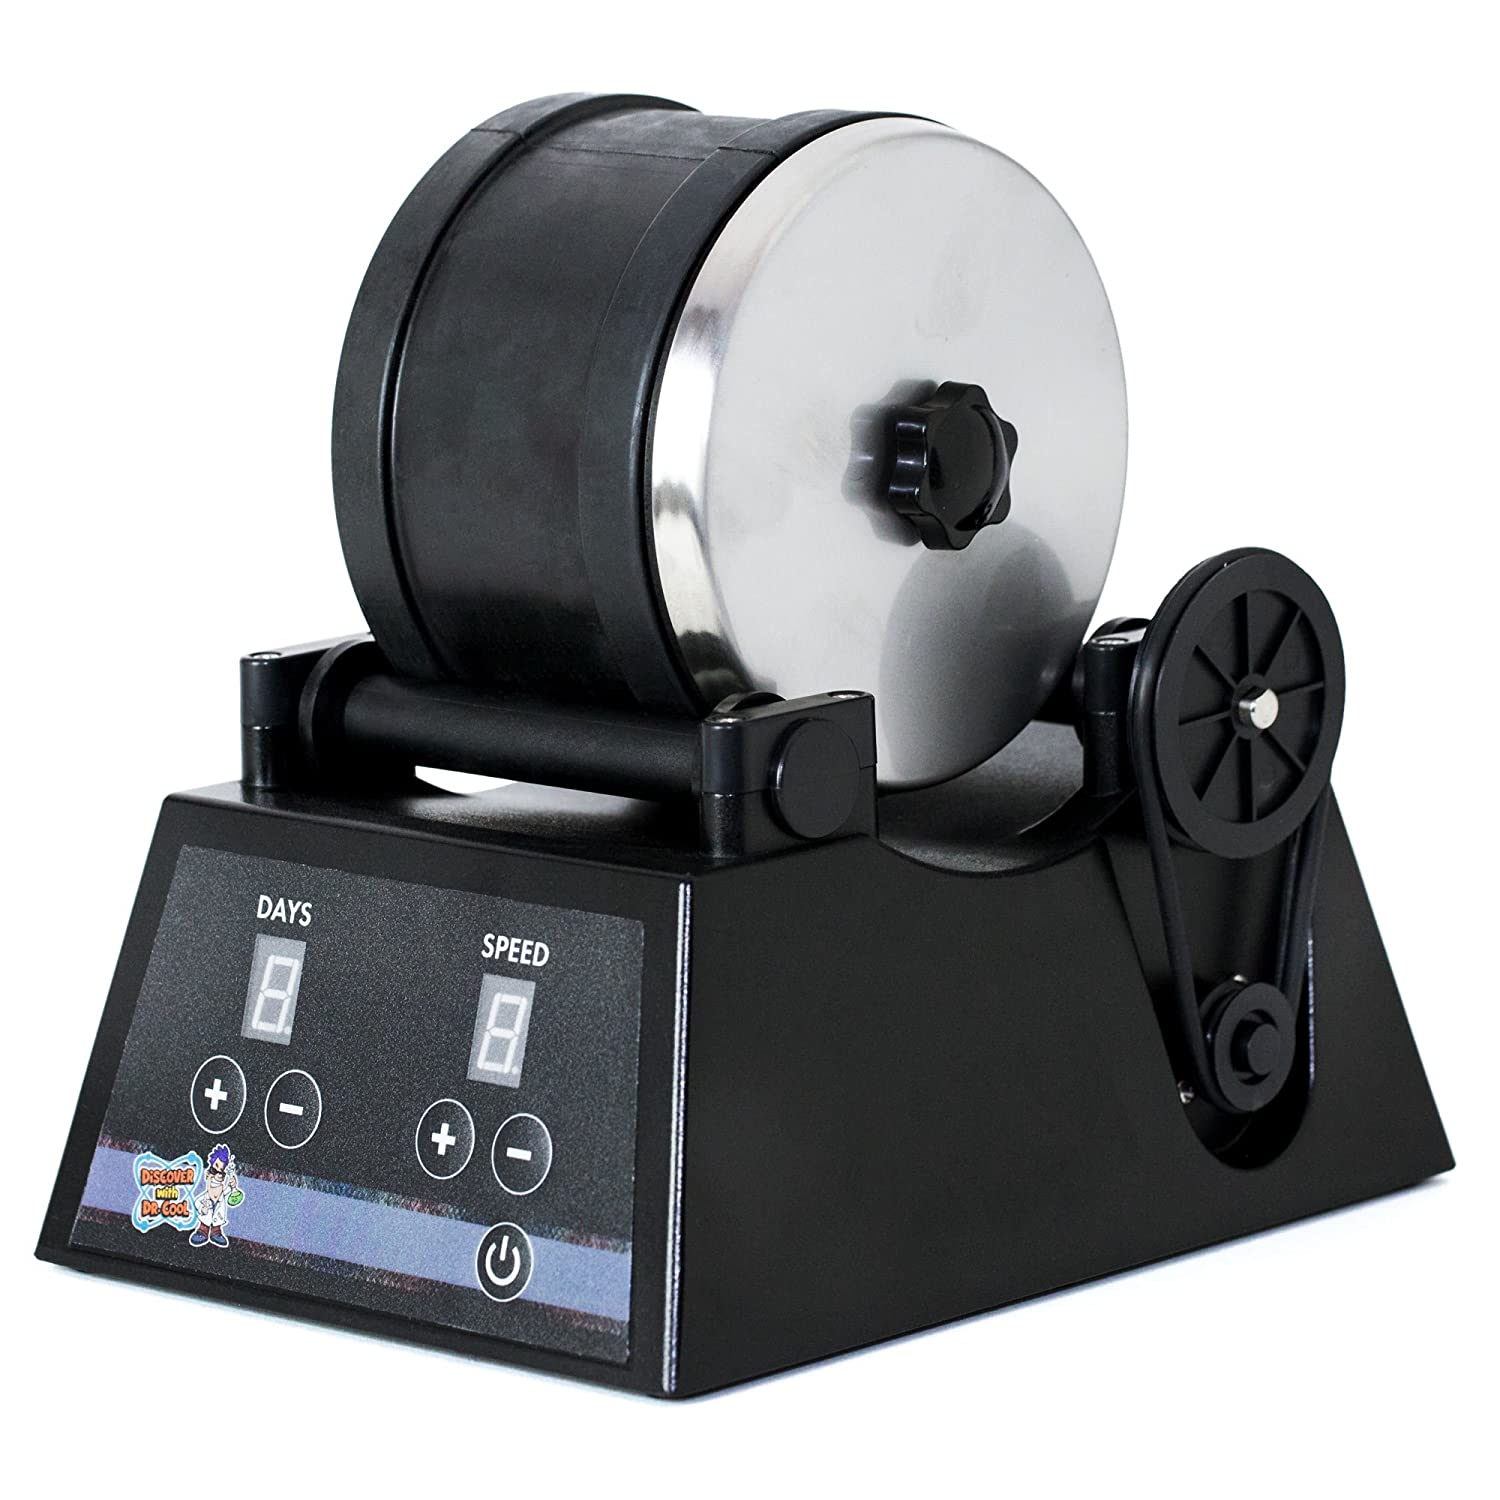 Discover with Dr. Cool PRO Series Rock Tumbler - Turn Rocks into Stunning Gemstones!